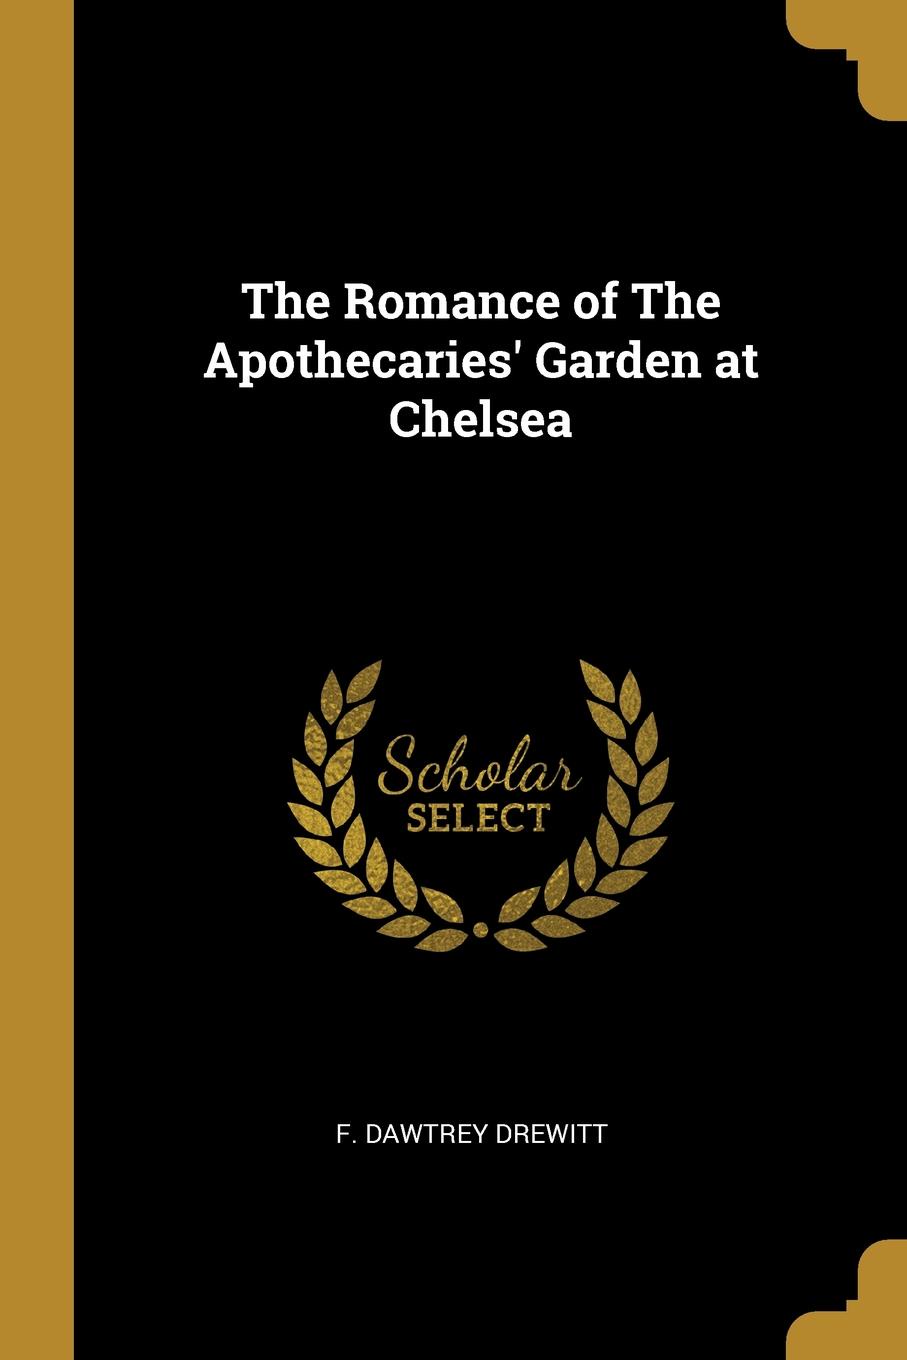 The Romance of The Apothecaries. Garden at Chelsea